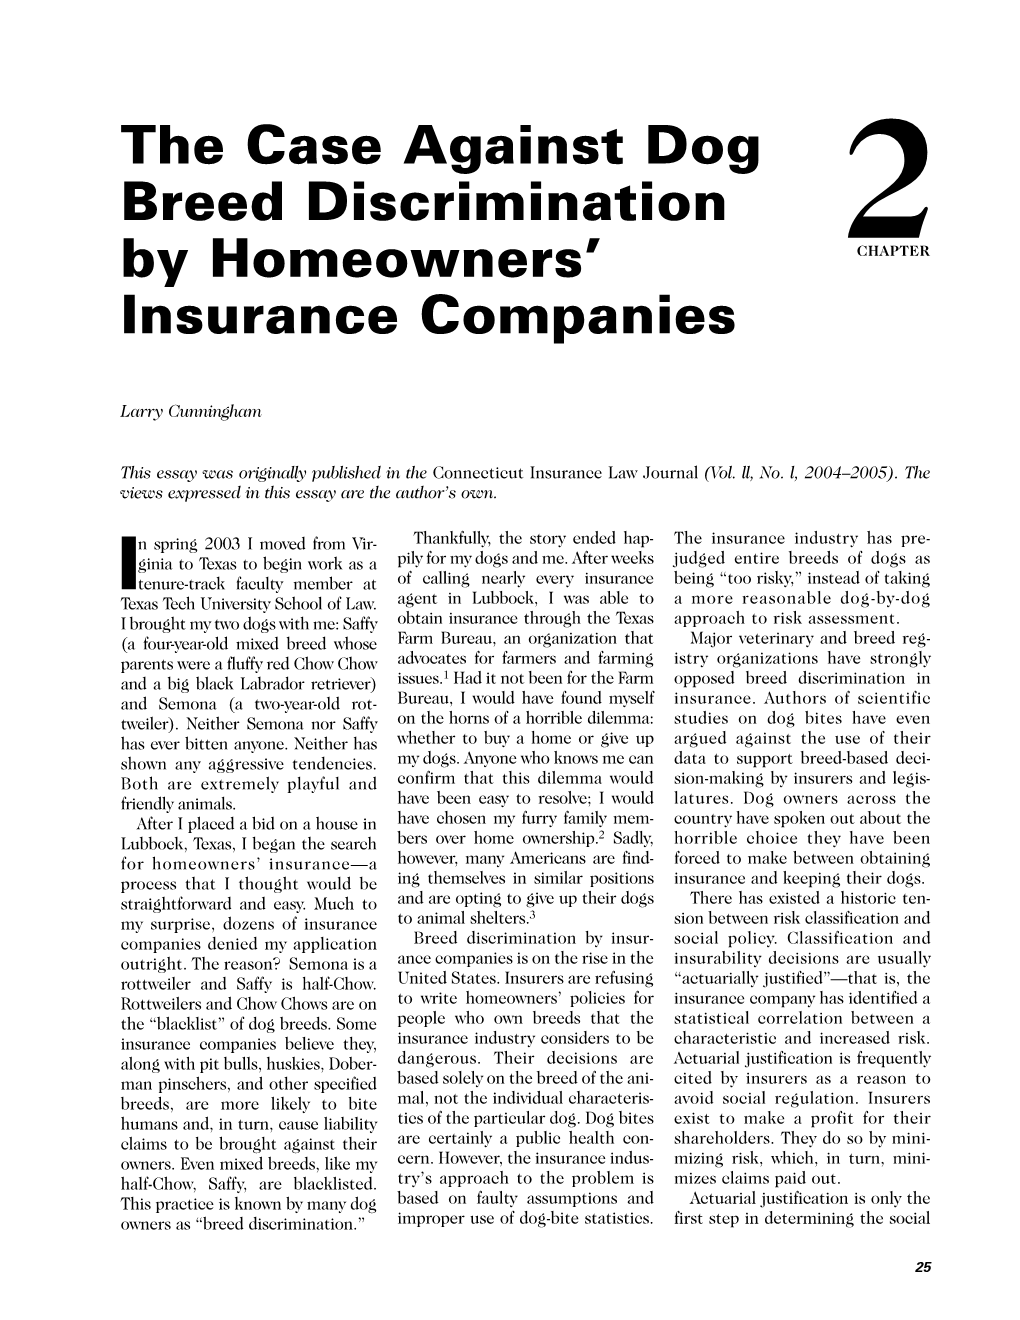 The Case Against Dog Breed Discrimination by Homeowners' Insurance Companies